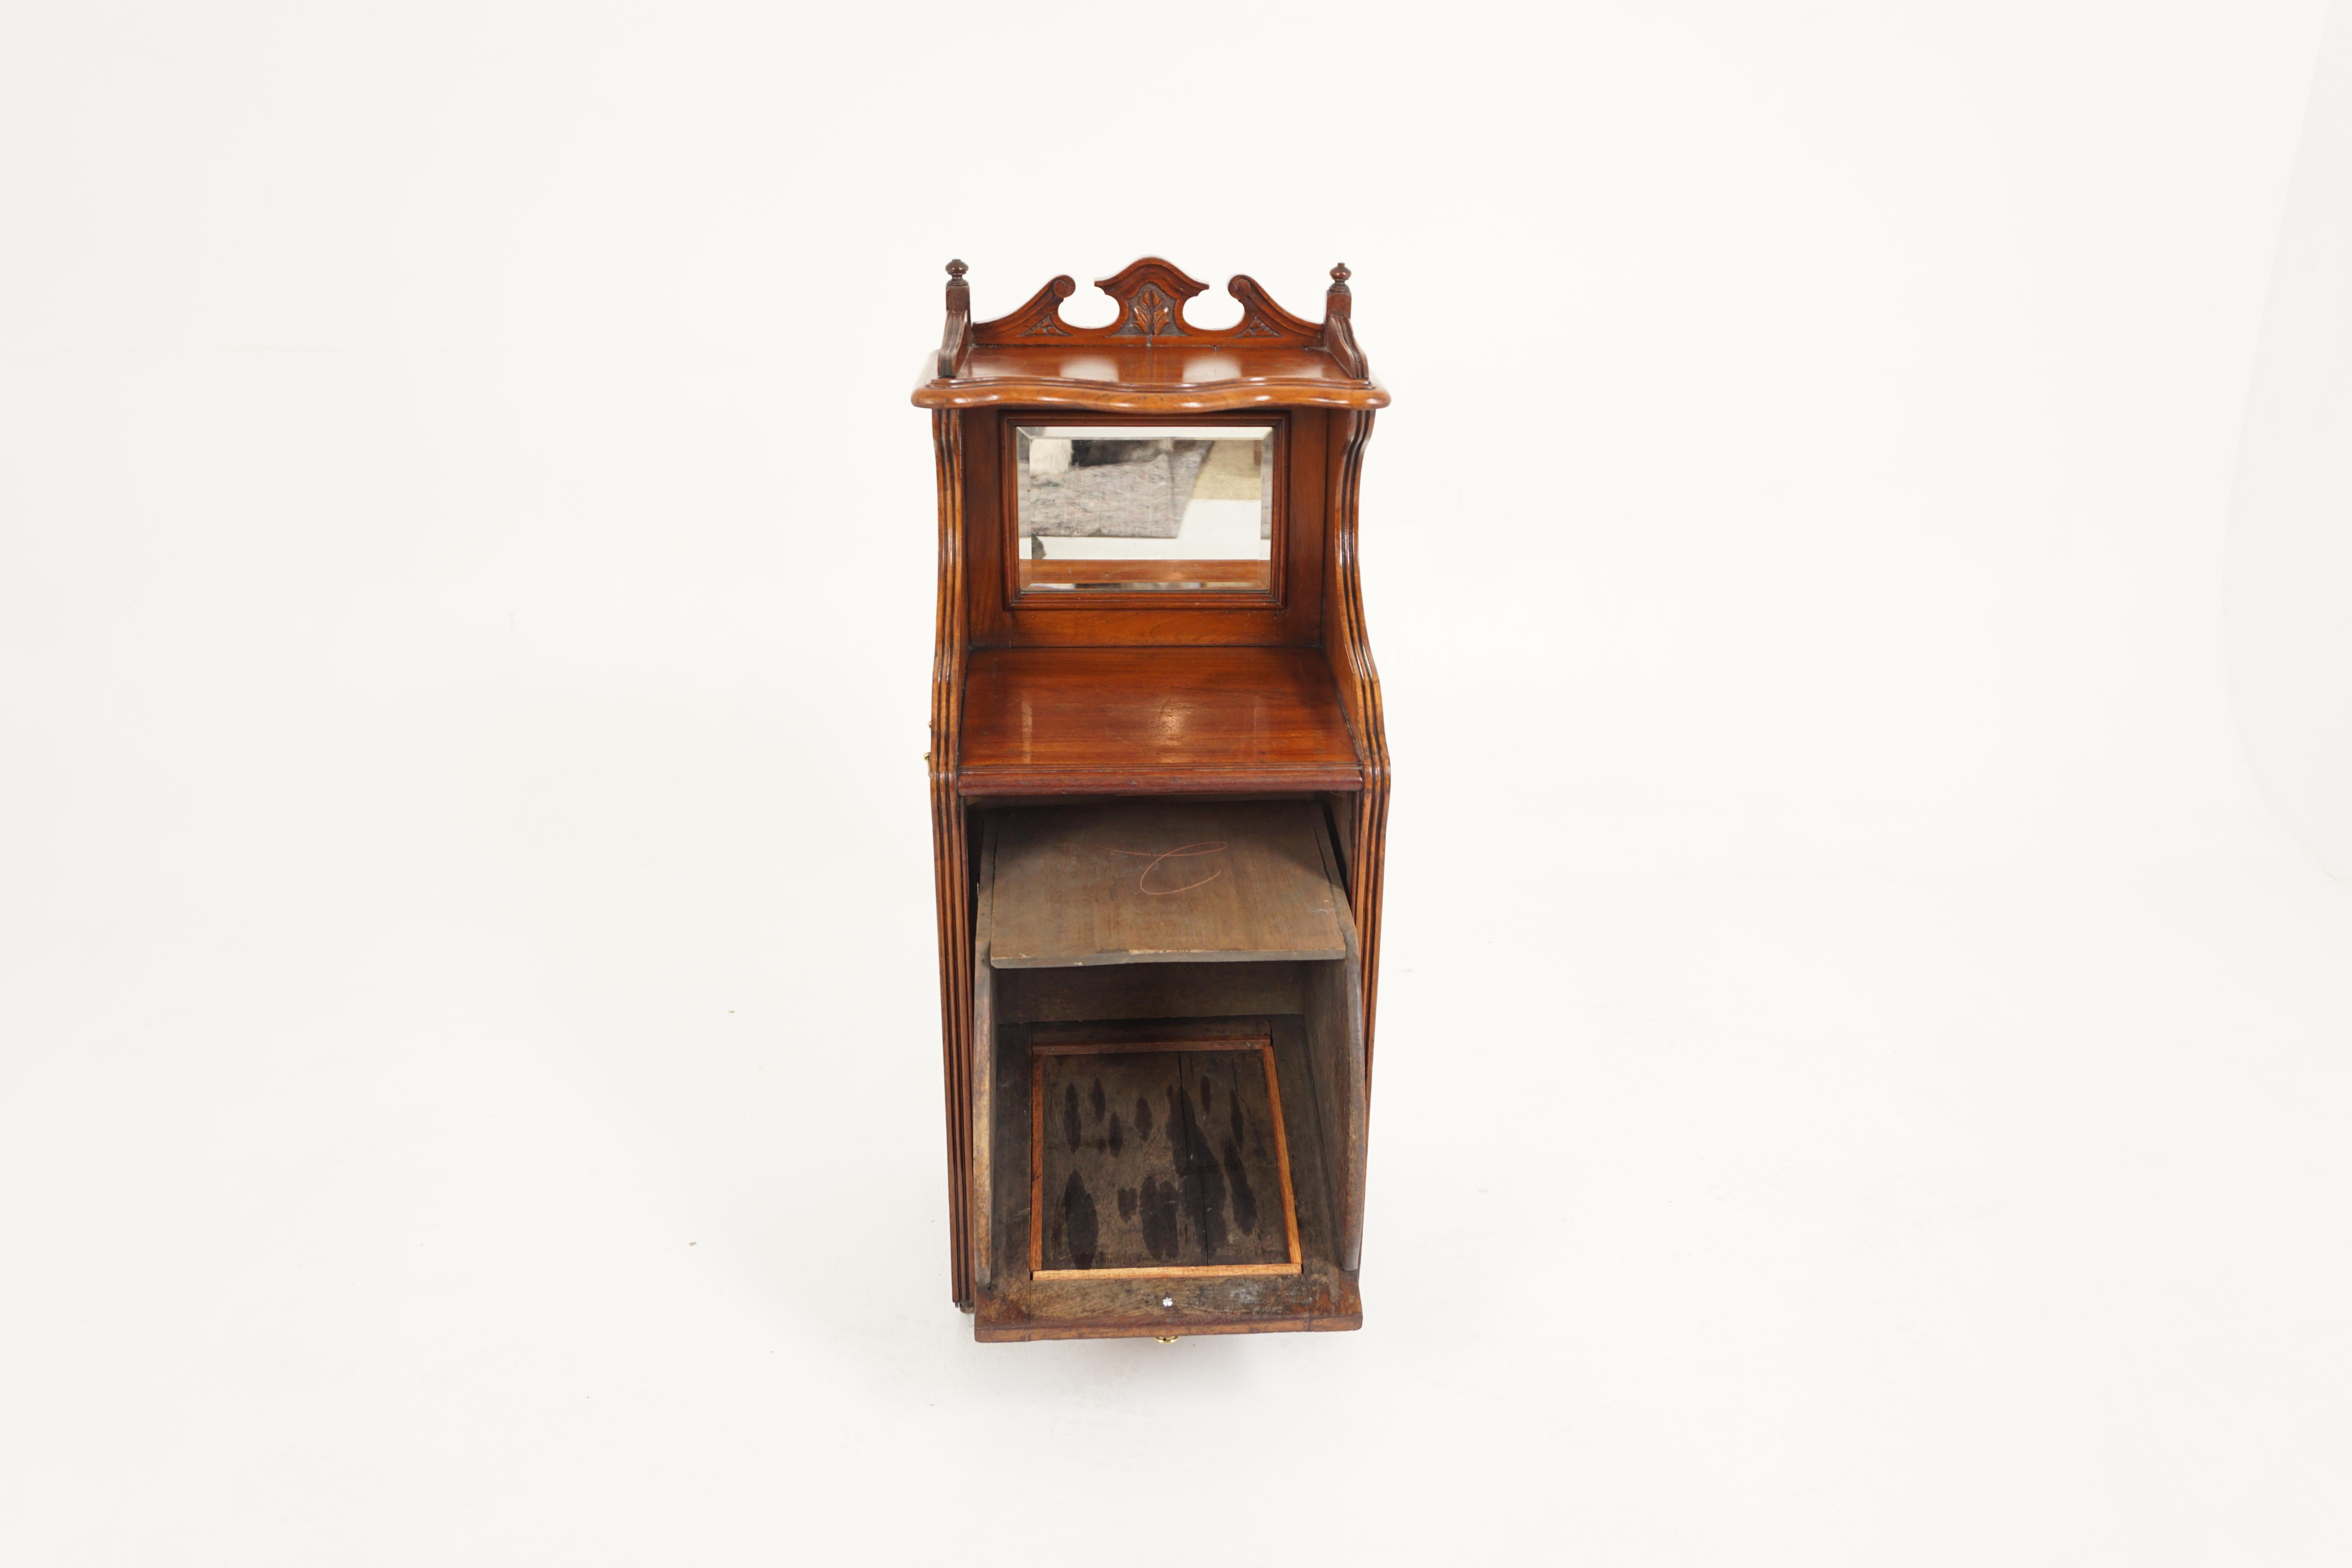 Antique Victorian walnut mirror back coal box, fireside box, cabinet, Purdonium, Scotland 1880, H351

Scotland 1880
Solid walnut
Original finish
With galleried top with centre carving
Terminating in turned finials
Beveled mirror underneath
Pull